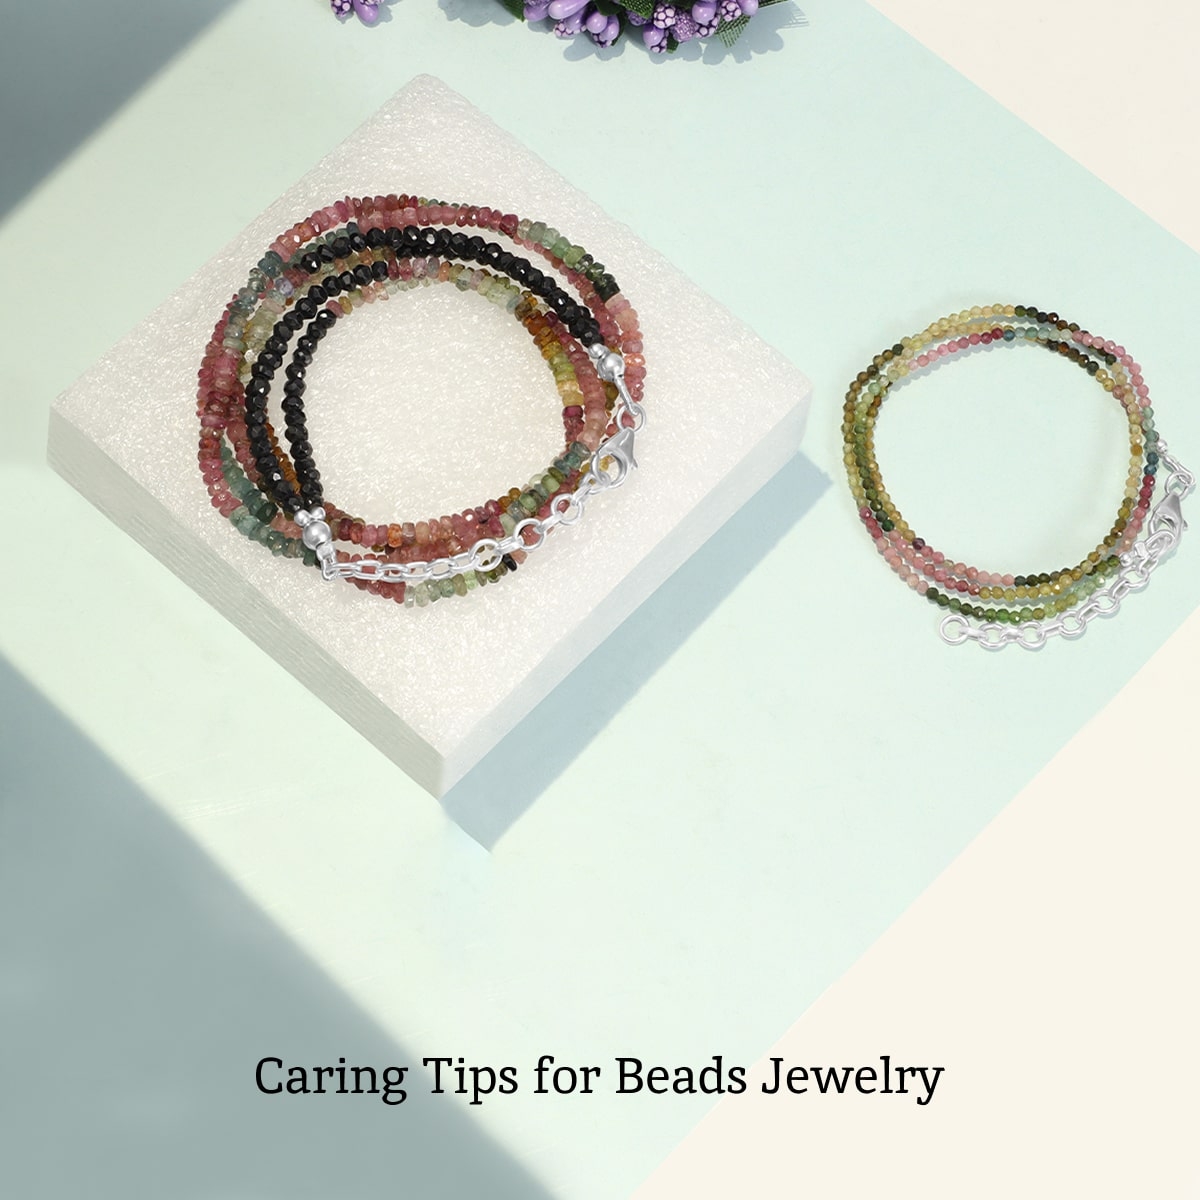 Tips for caring for your beads Jewelry